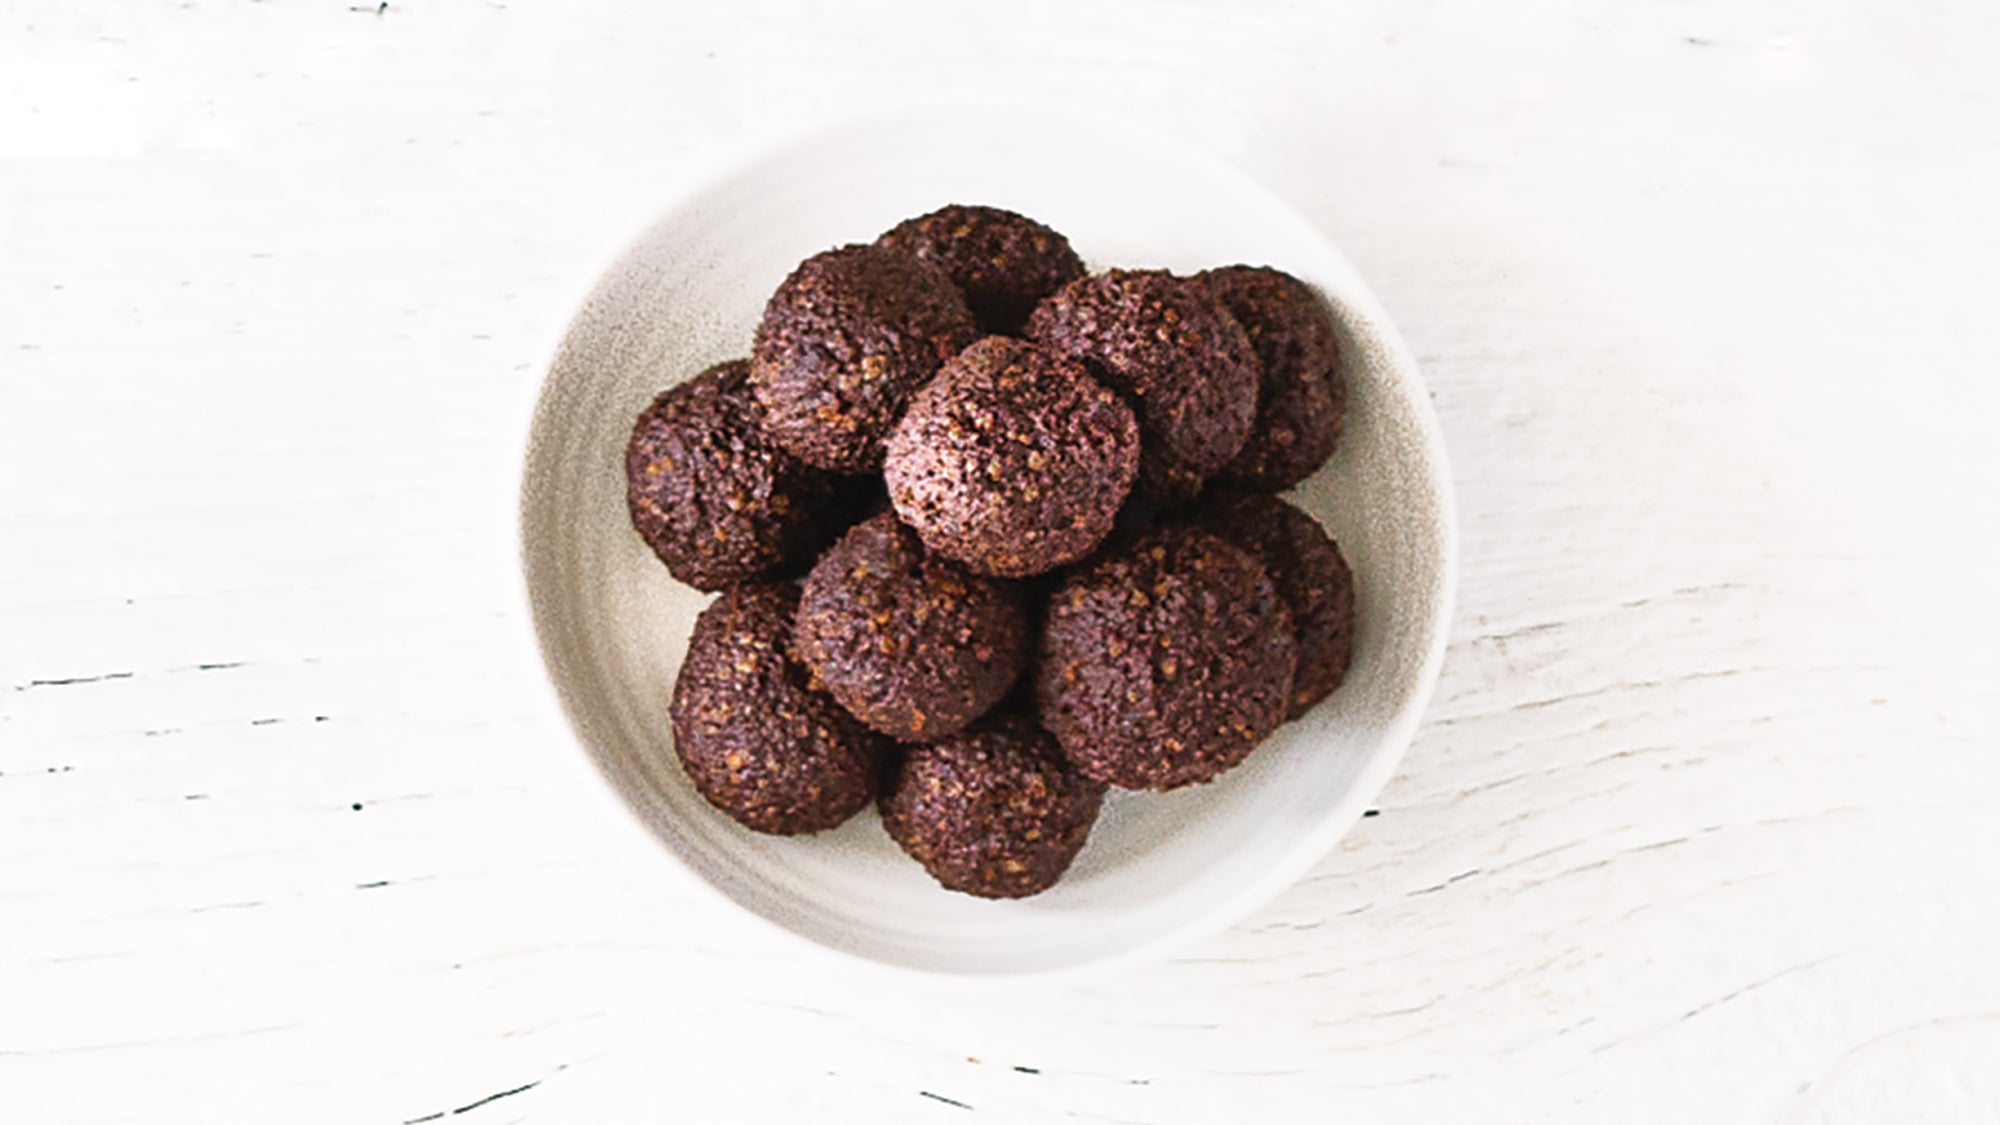 https://cdn.cleaneatingmag.com/wp-content/uploads/2015/12/date-and-cashew-protein-balls.jpg